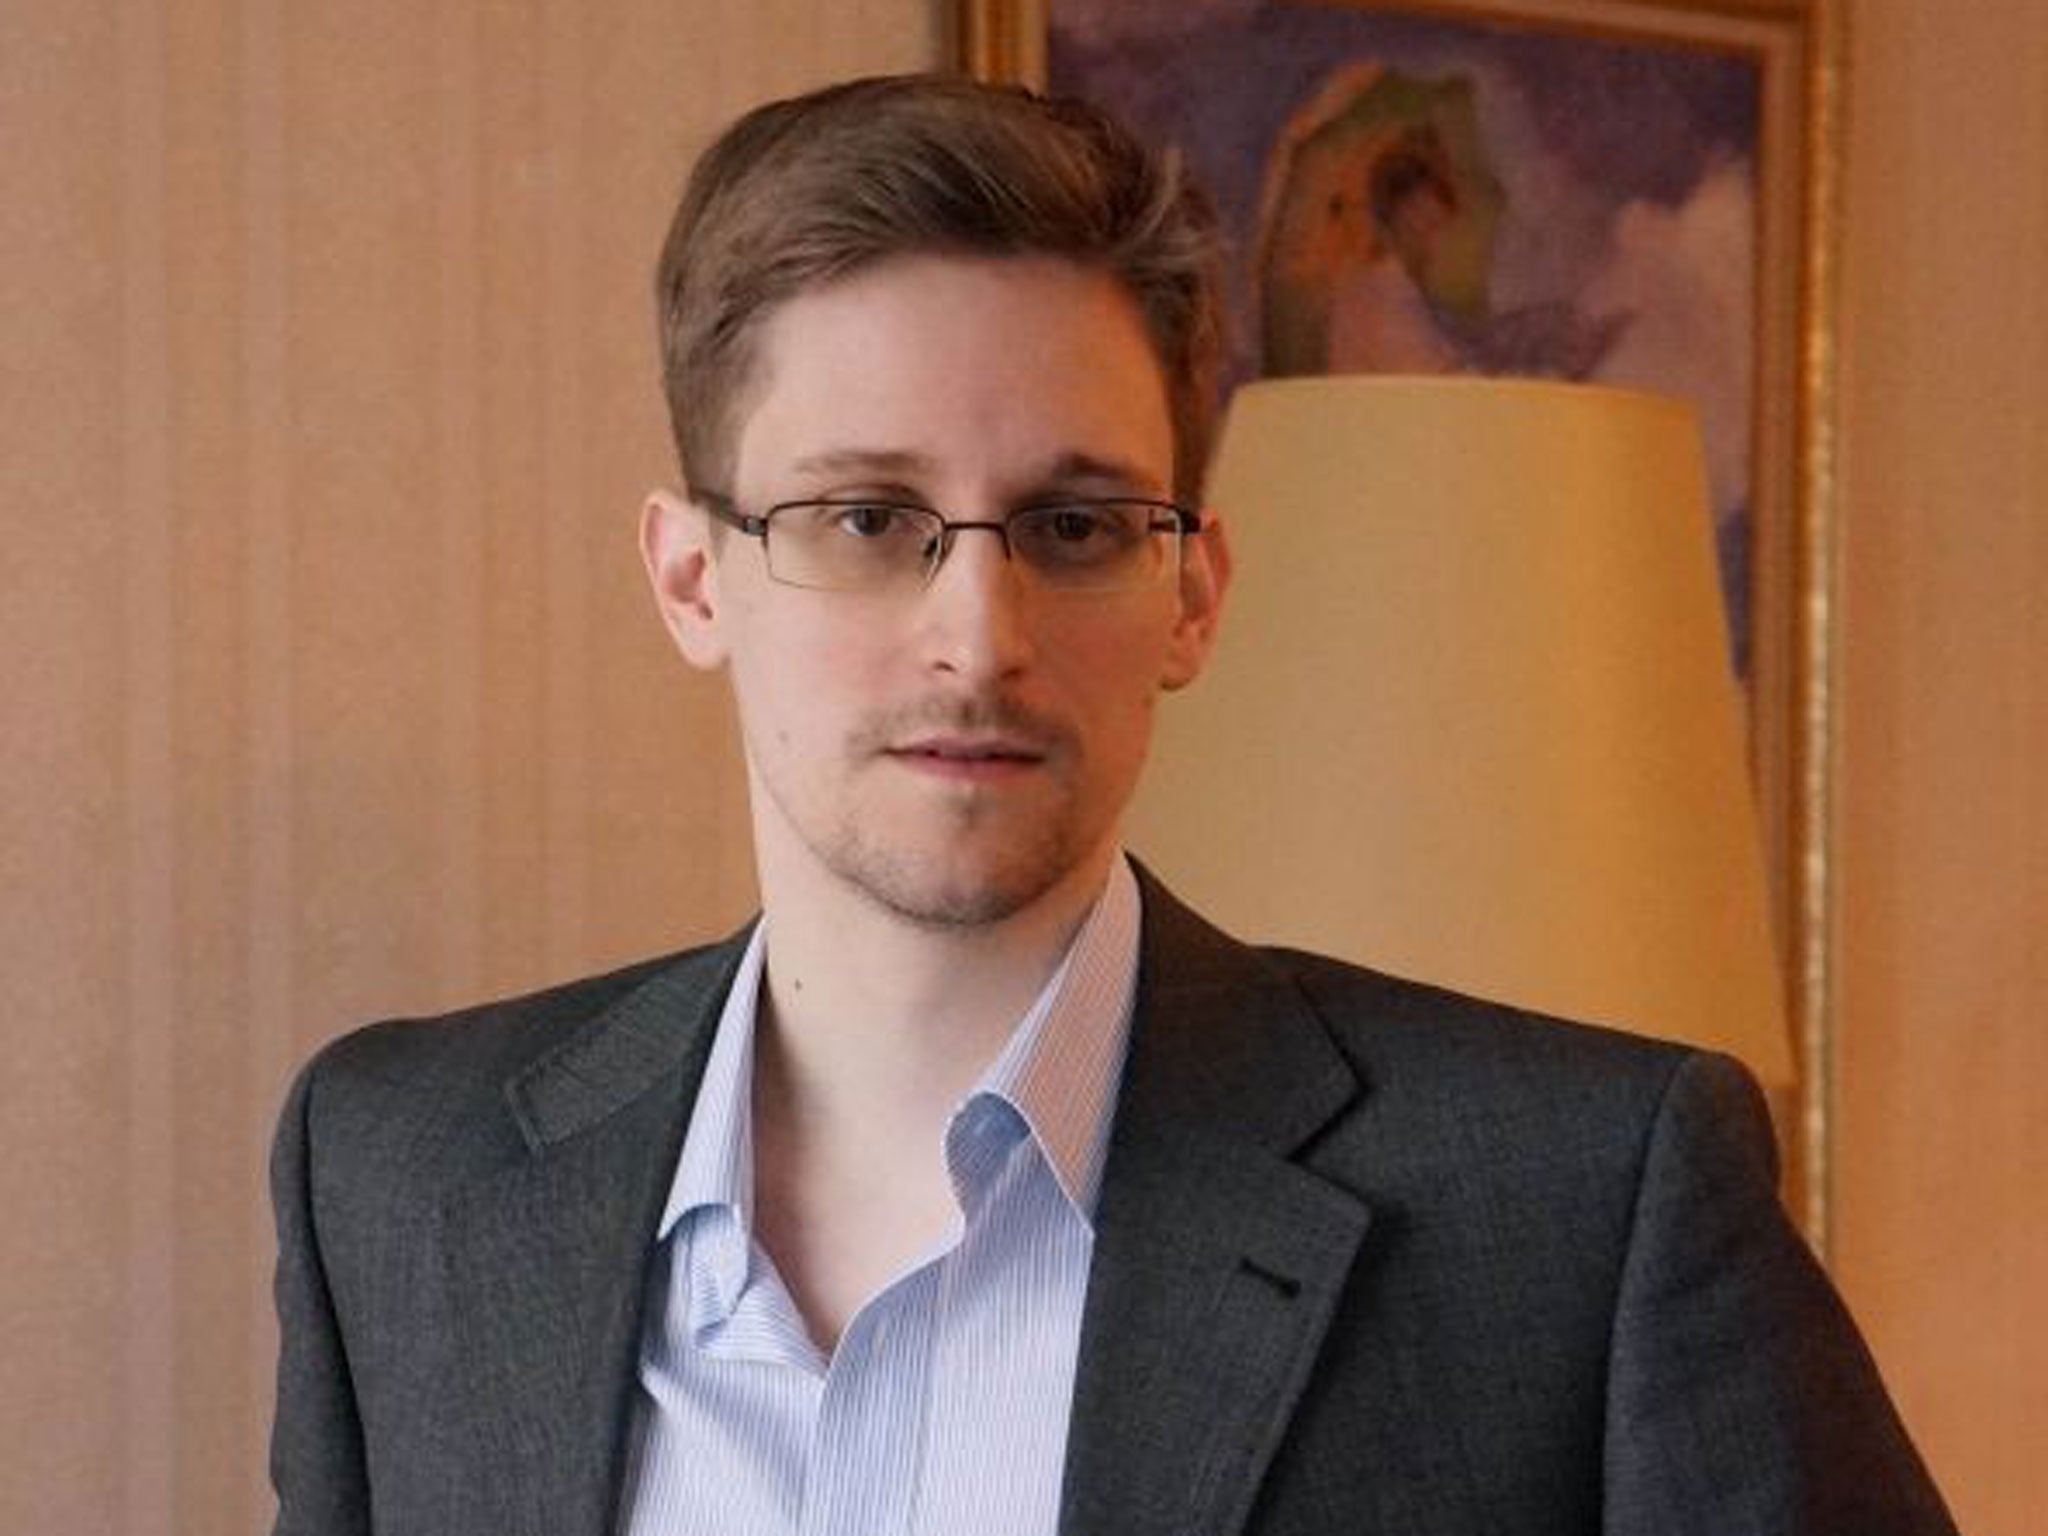 Snowden's web-centric life brings him into alignment with those Luddites who assume the worst of any innovation